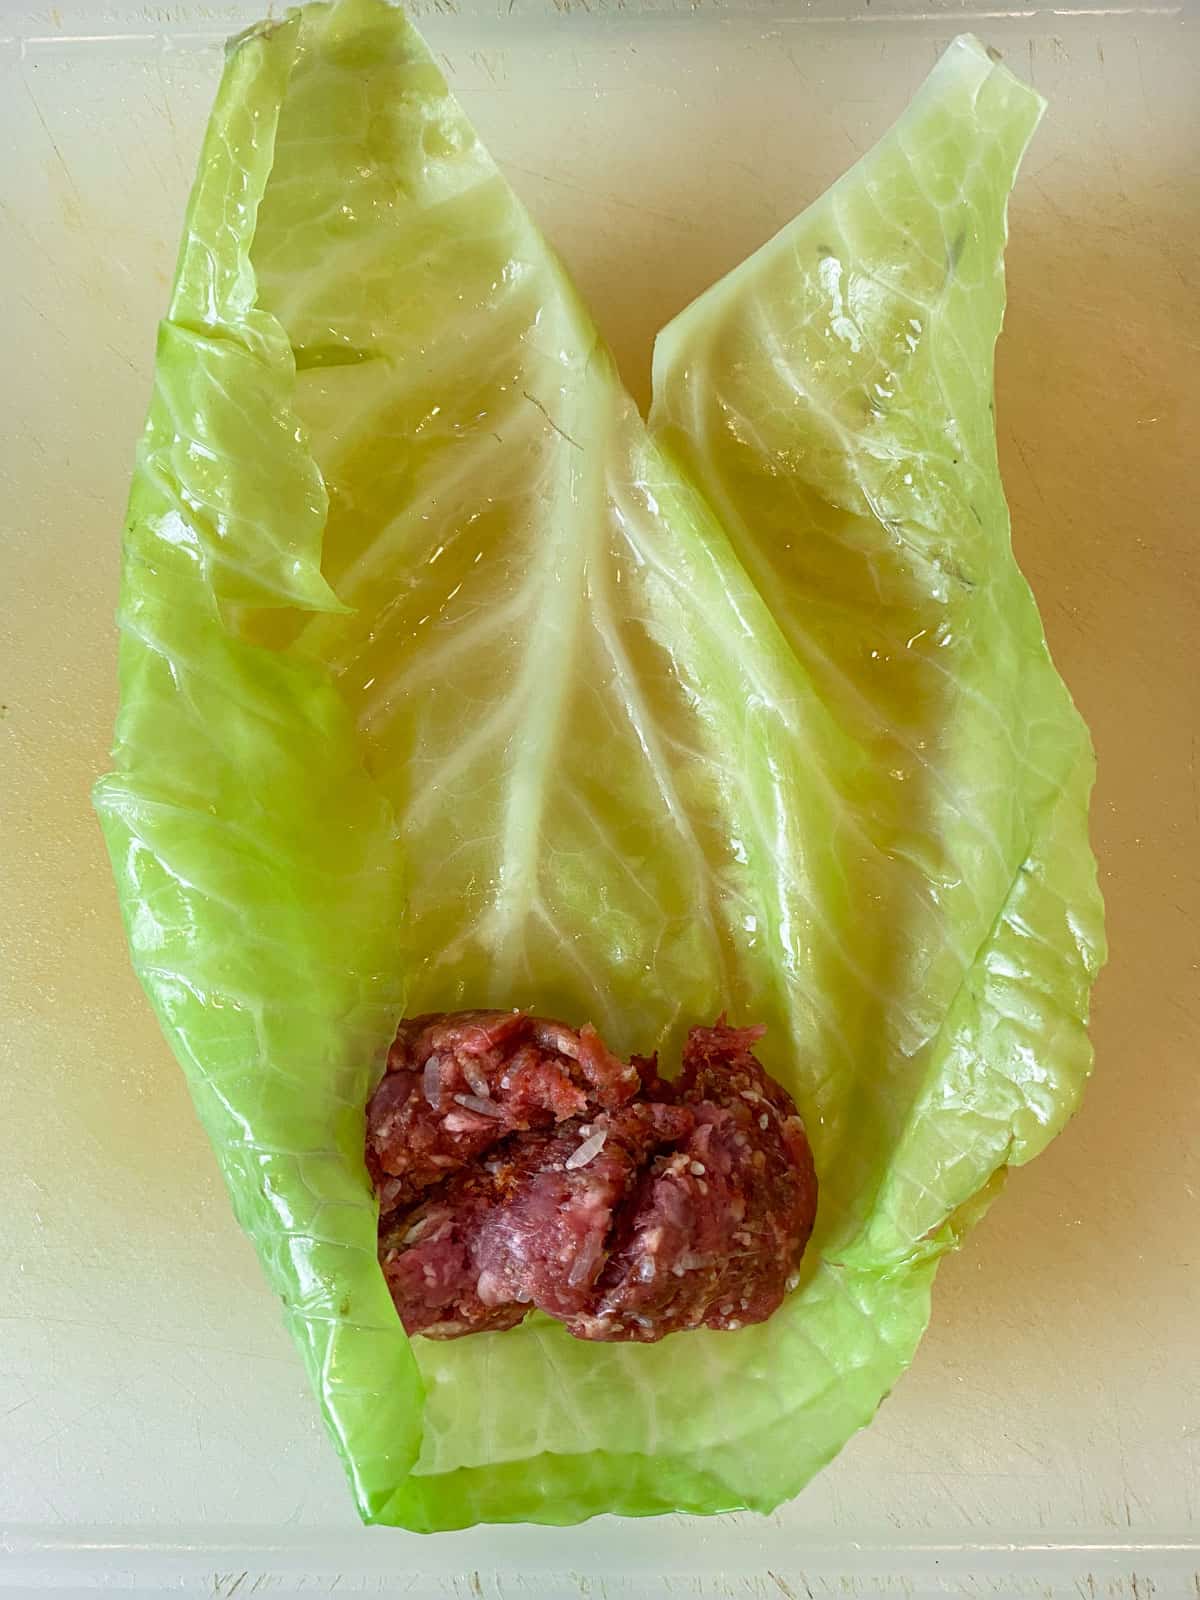 Add 2 tablespoons of the beef mixture to the cabbage leaf.